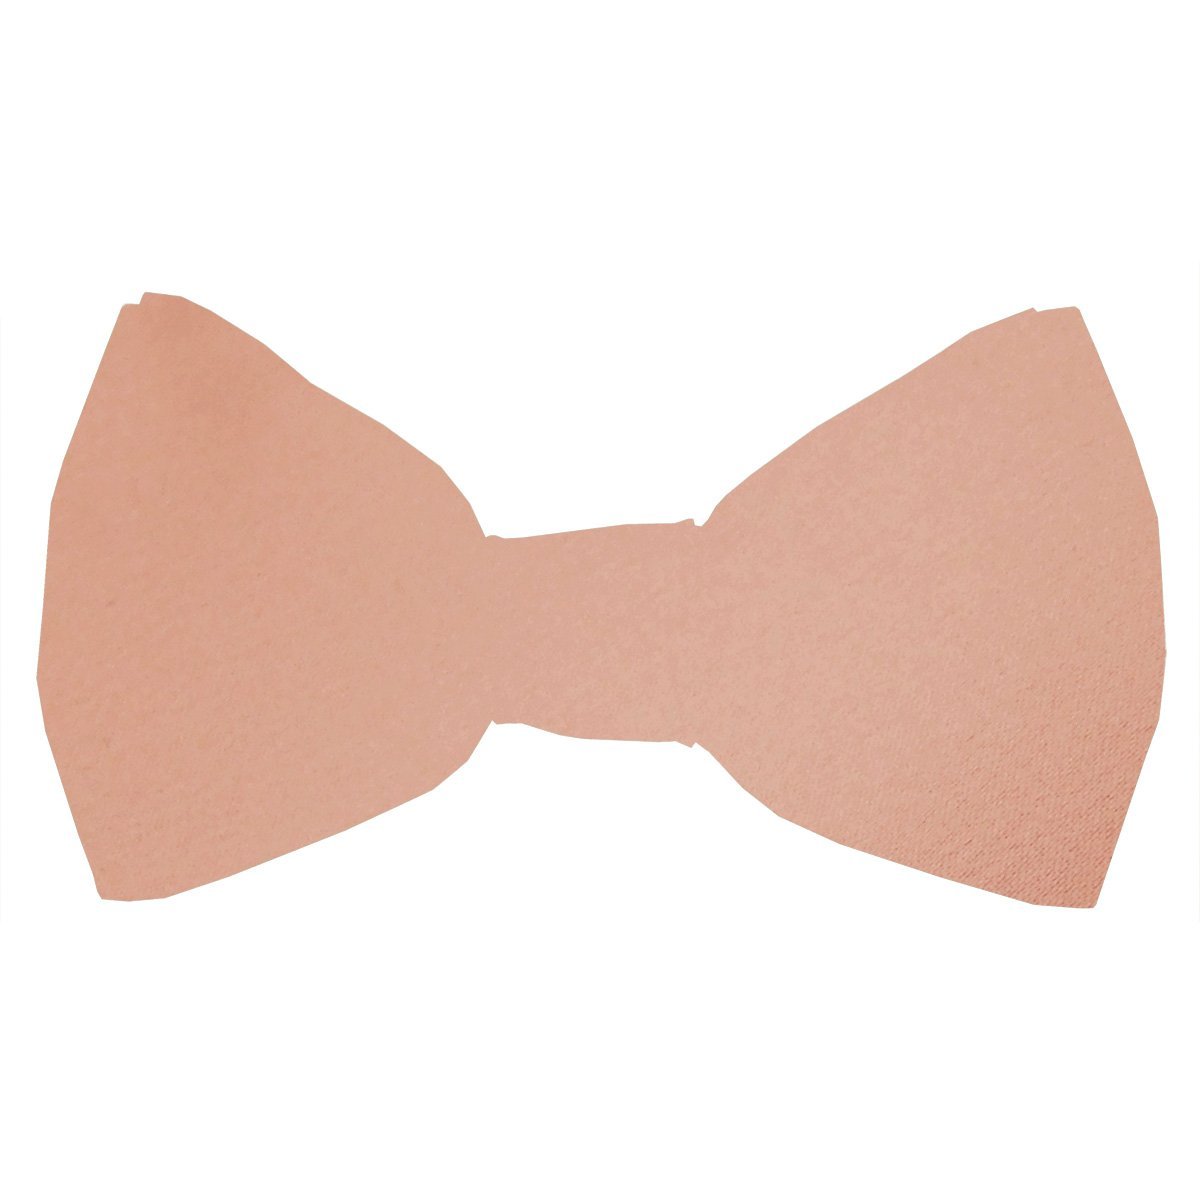 Copper Rose Boys Bow Ties - Childrenswear - Neckstrap - Swagger & Swoon